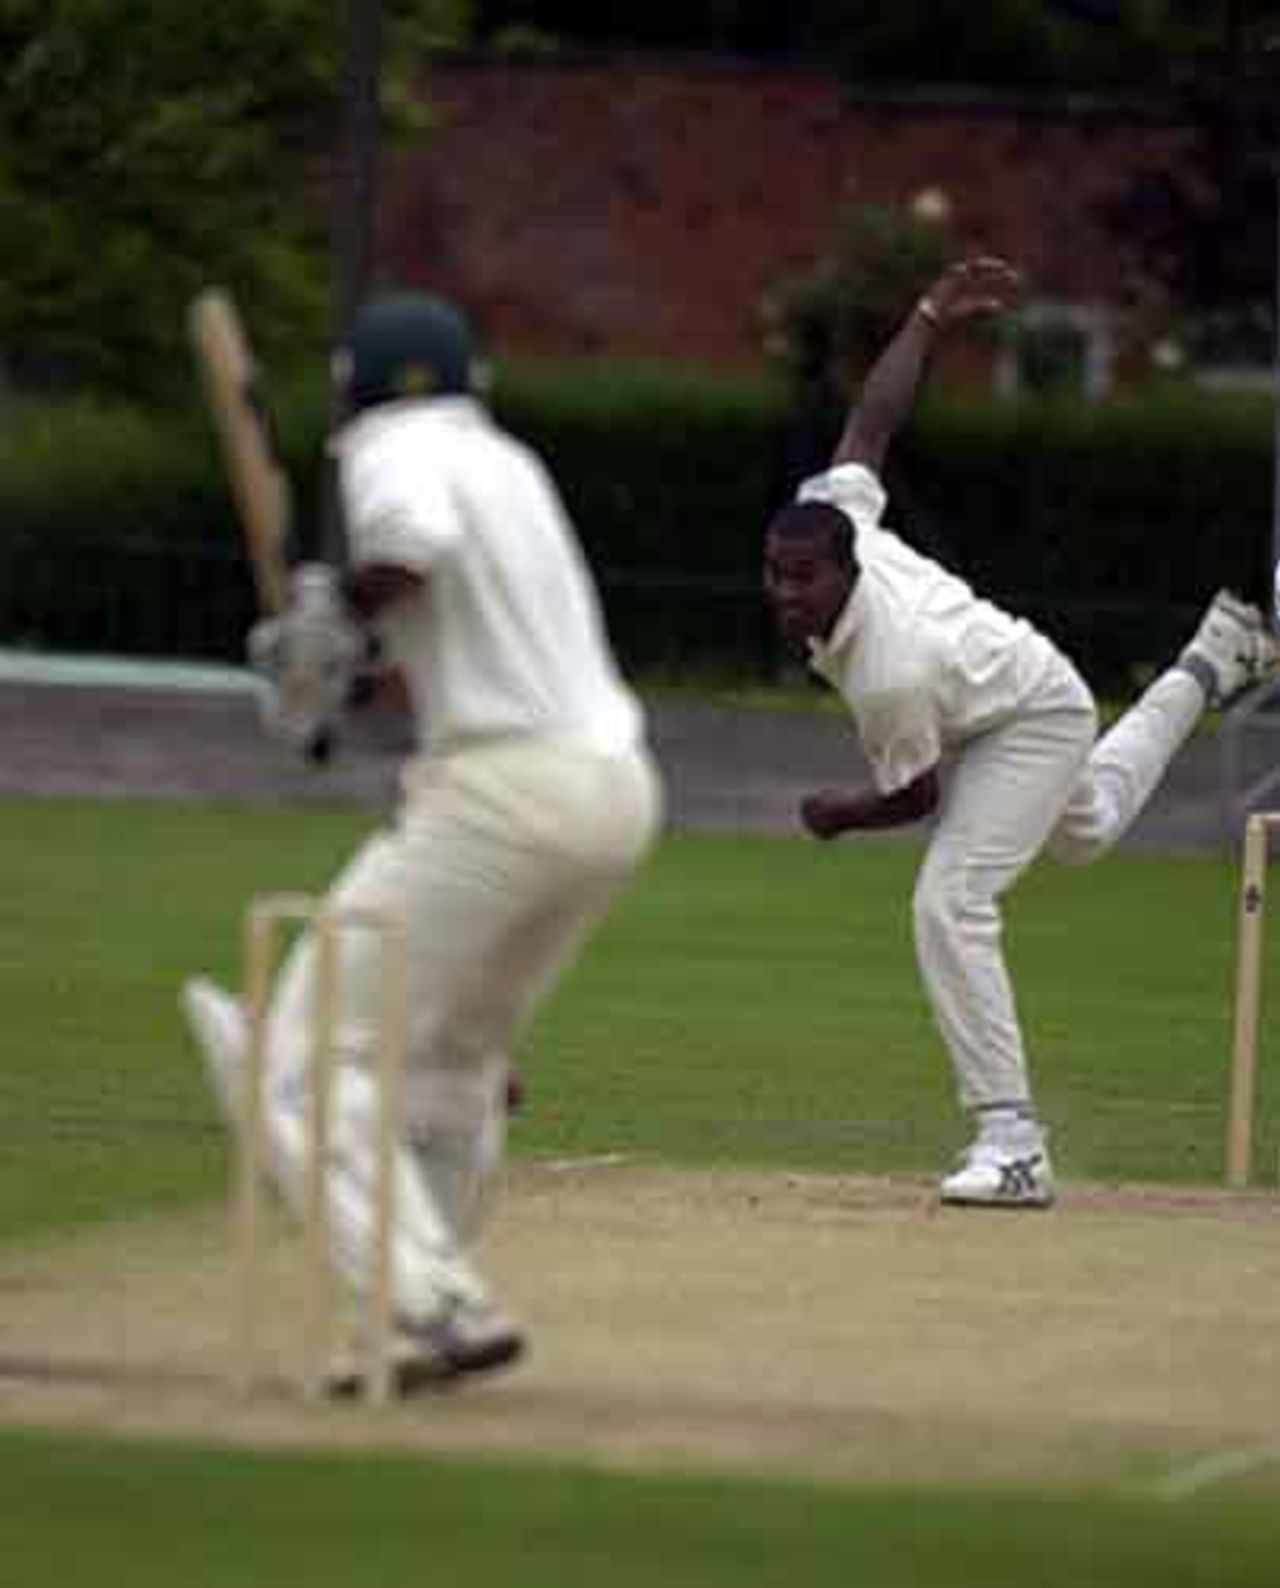 Perera hurls down a delivery to Usman Afzaal, MCC v Sri Lankans at Chesterfield, June 2002